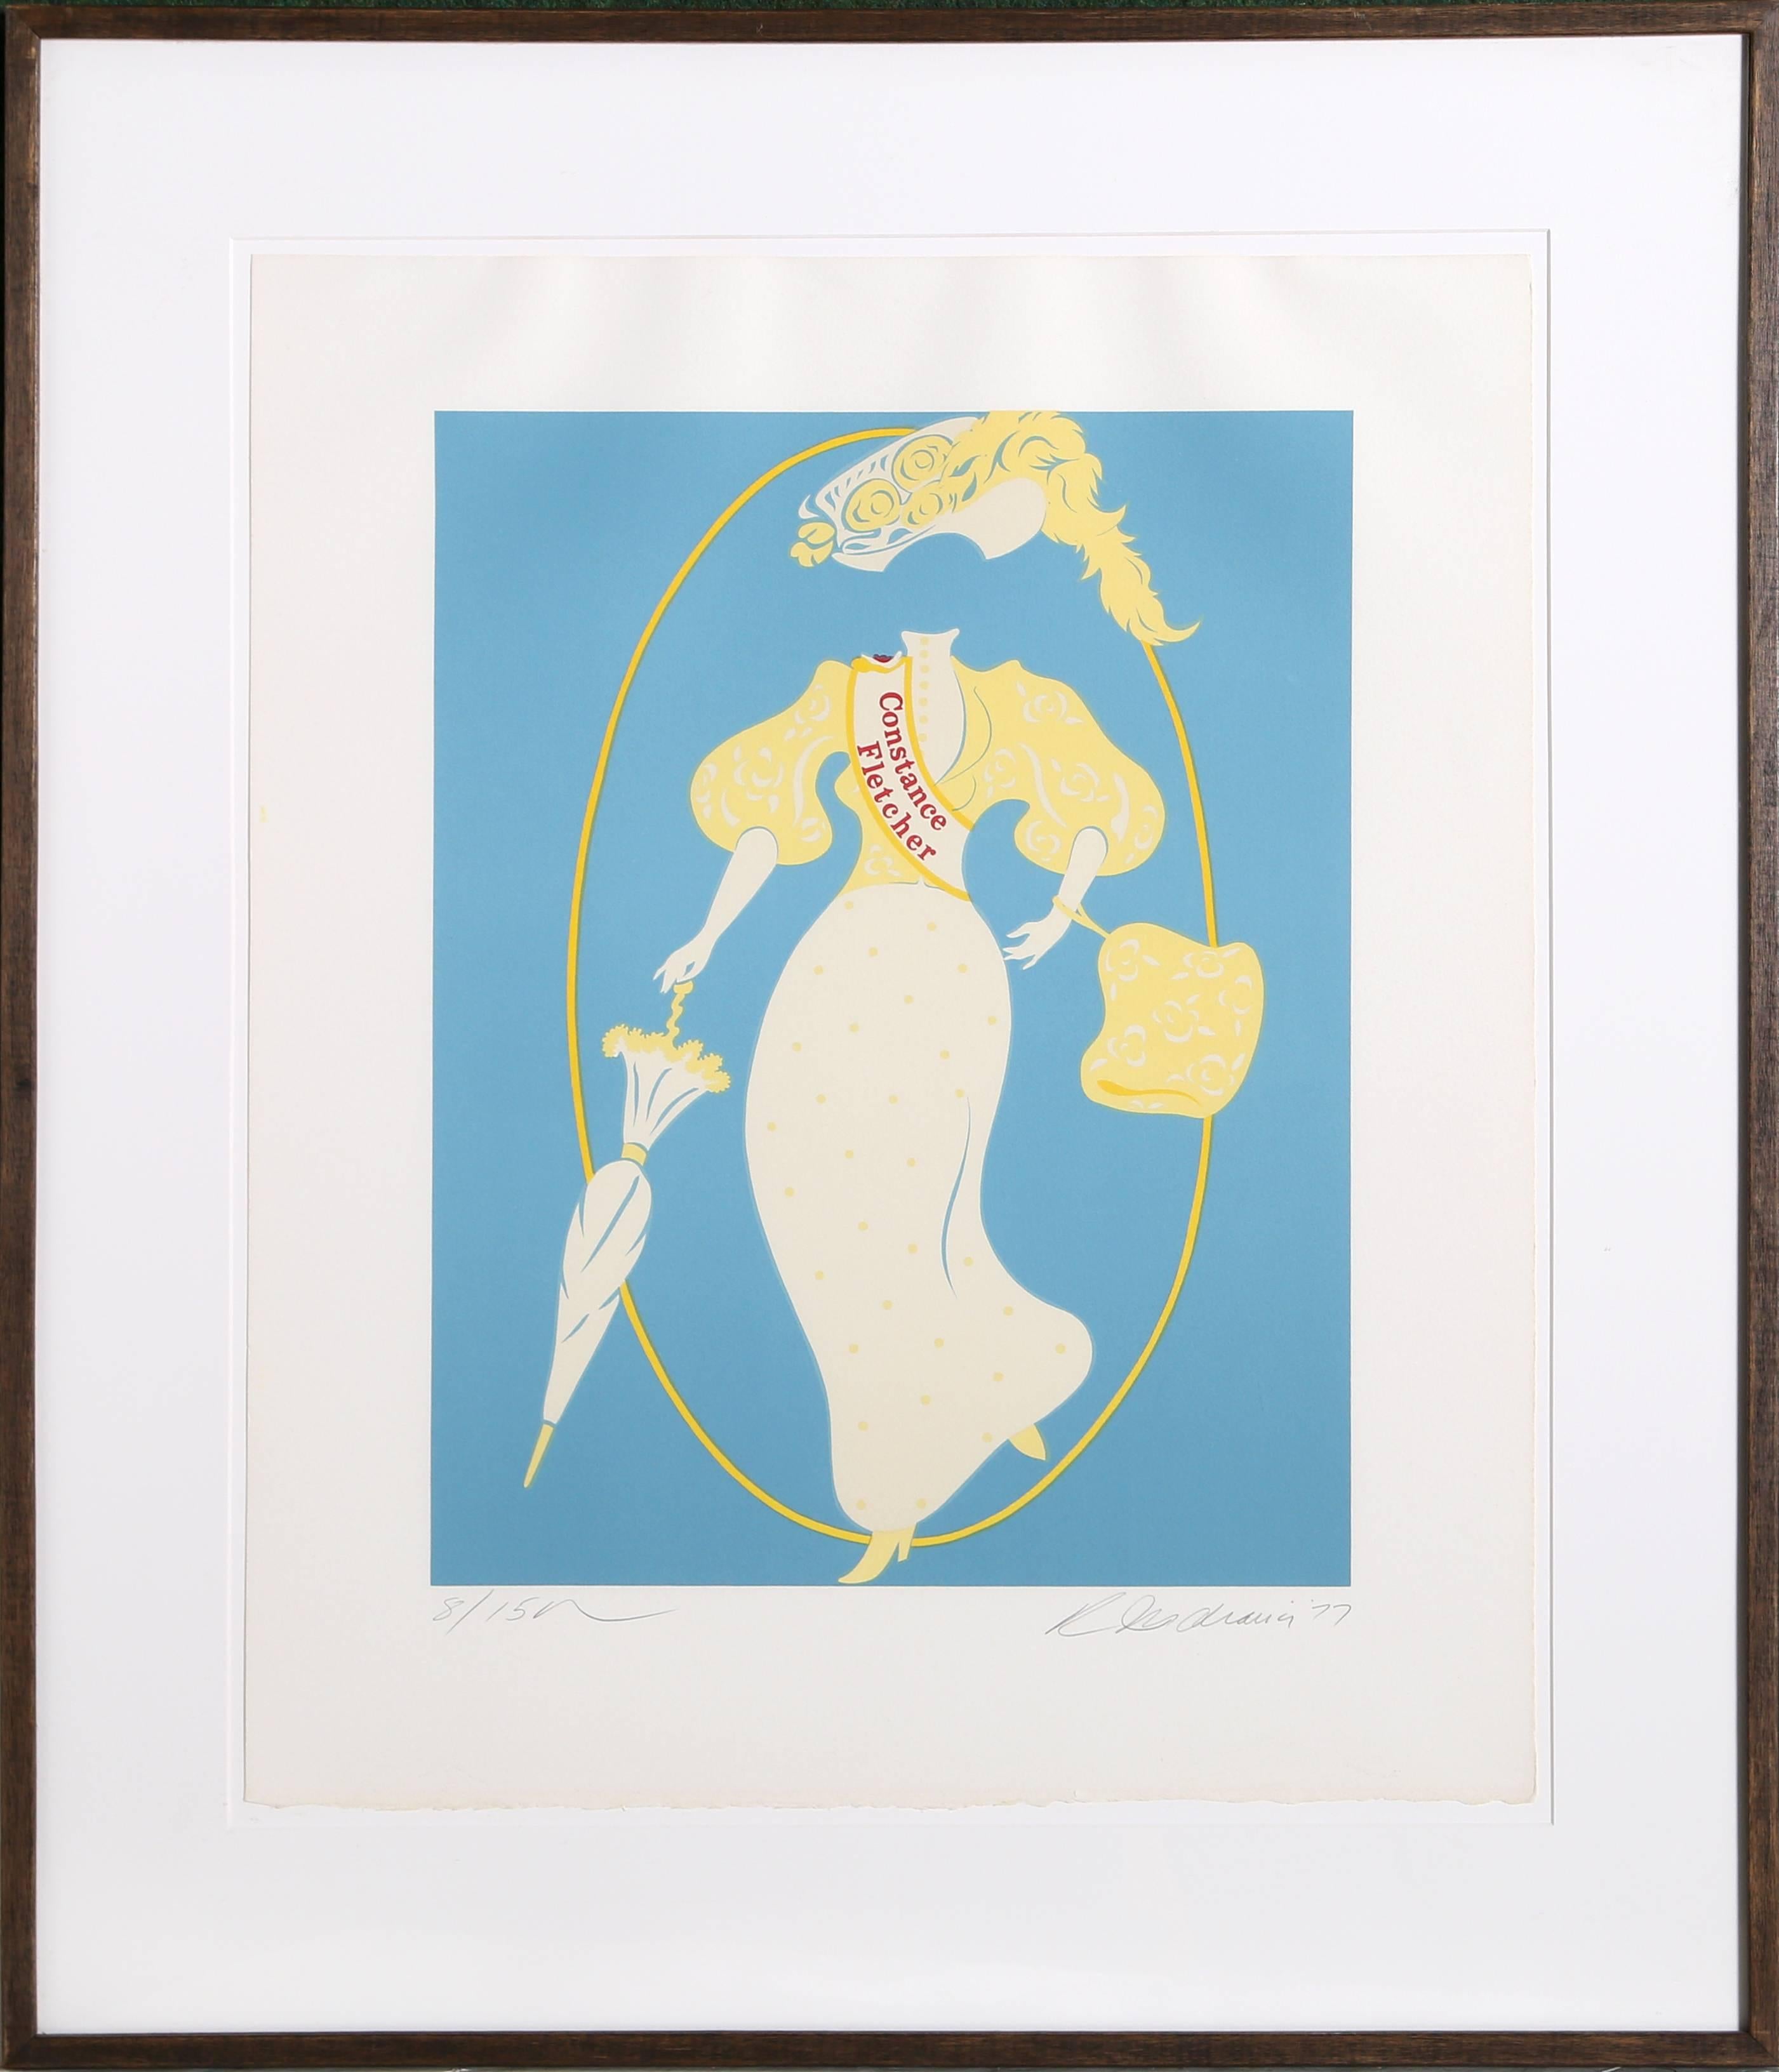 Artist: Robert Indiana, American (1928 - 2018)
Title: Constance Fletcher from Mother of Us All Series
Year: 1977
Medium: Lithograph on Arches, signed and numbered in pencil 
Edition: 150 
Paper Size: 24 x 20 inches 
Frame Size: 31.25 x 26.75